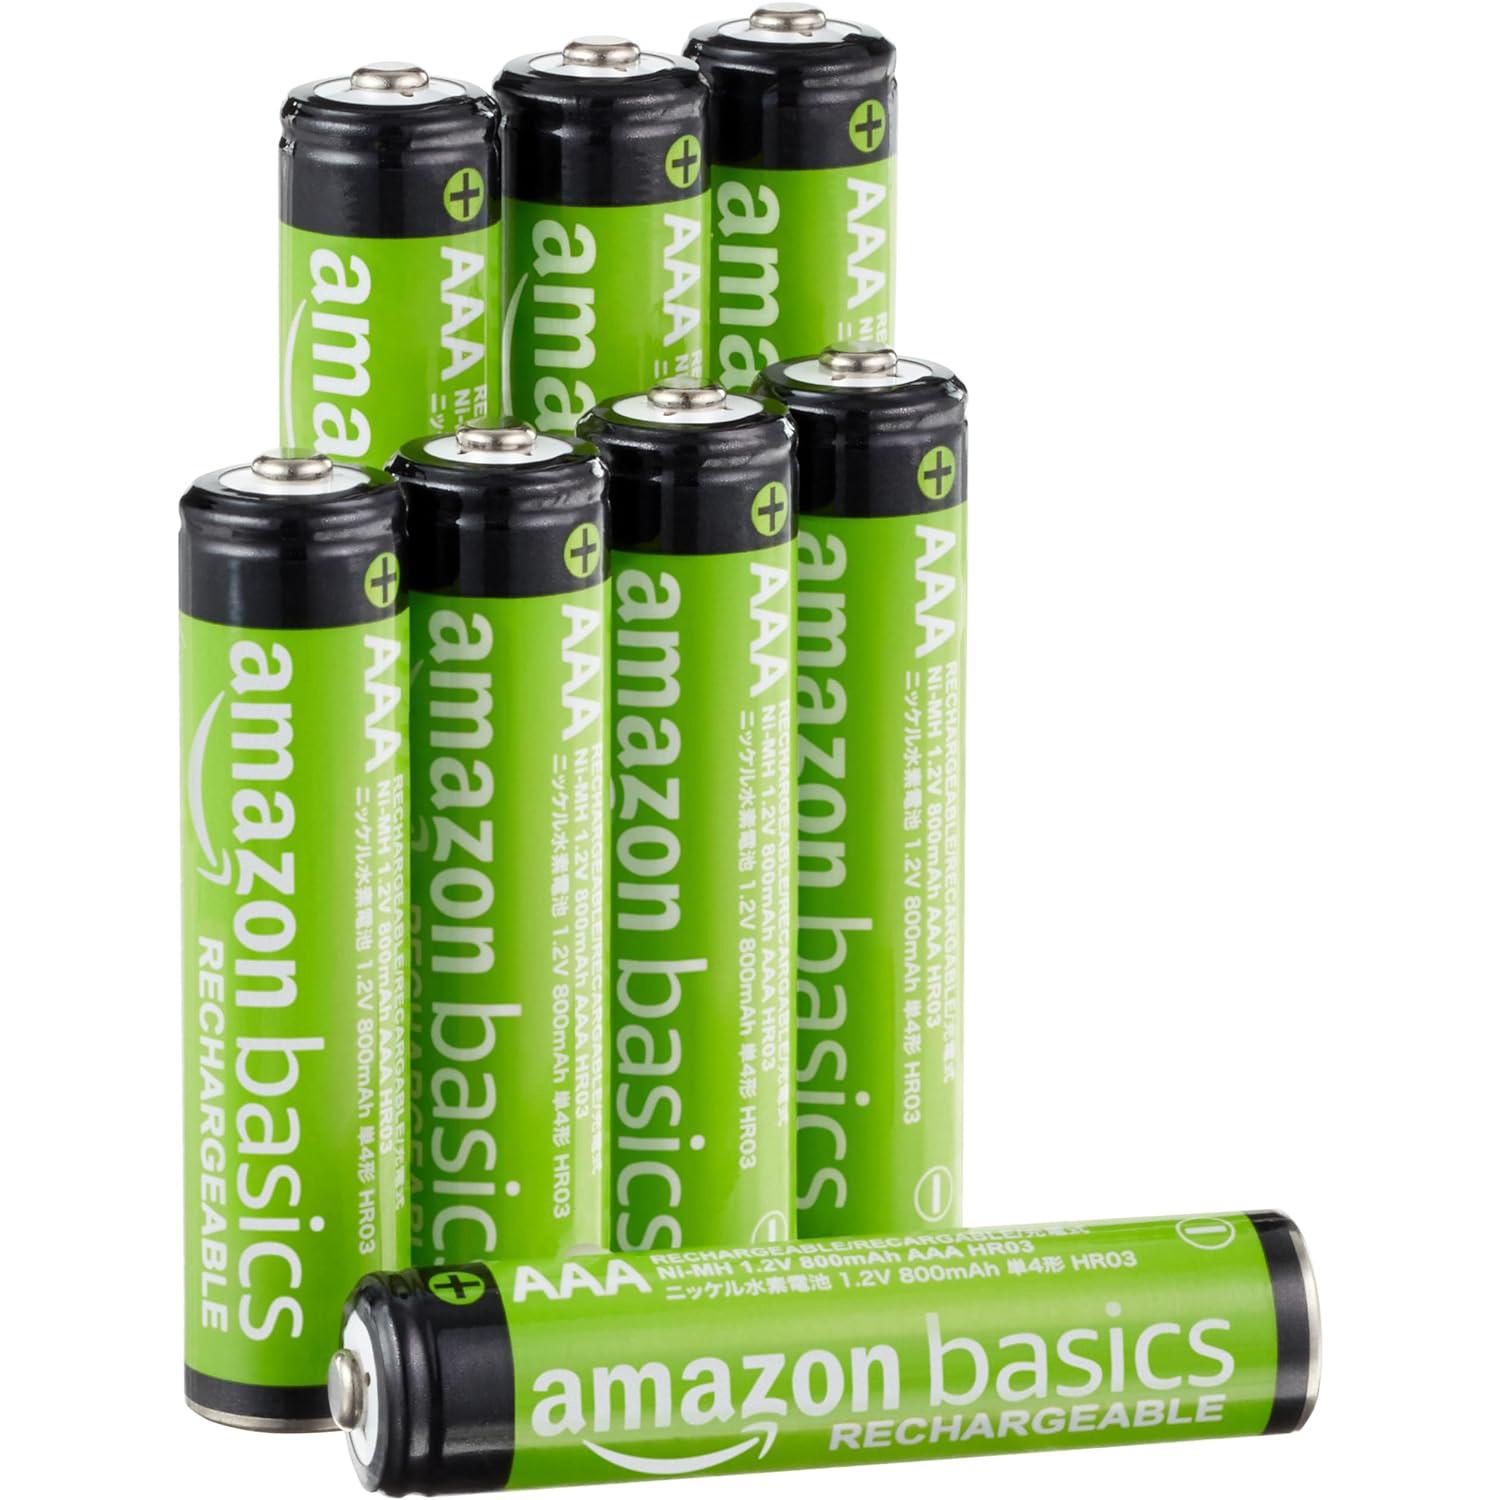 AmazonBasics 800mAh Pre-charged Rechargeable AAA Batteries 8 Pack for $5.55